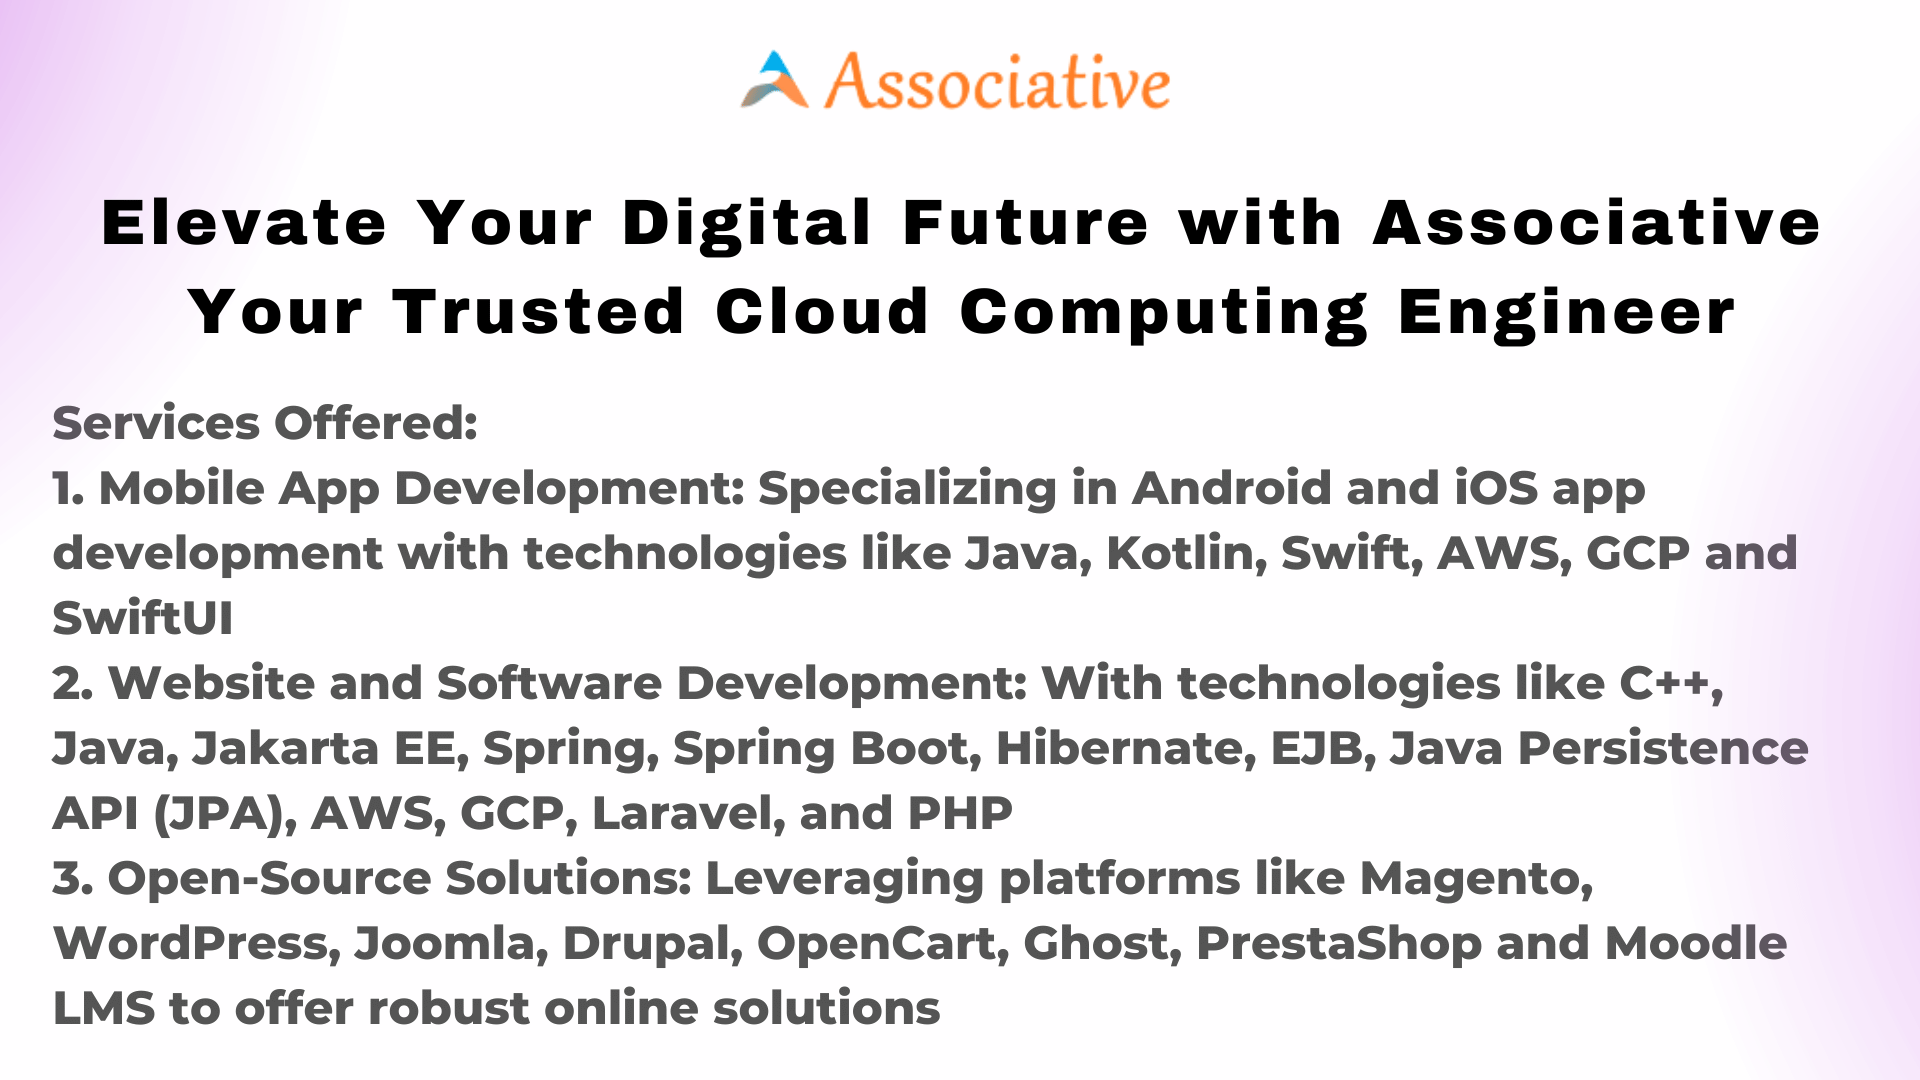 Elevate Your Digital Future with Associative Your Trusted Cloud Computing Engineer